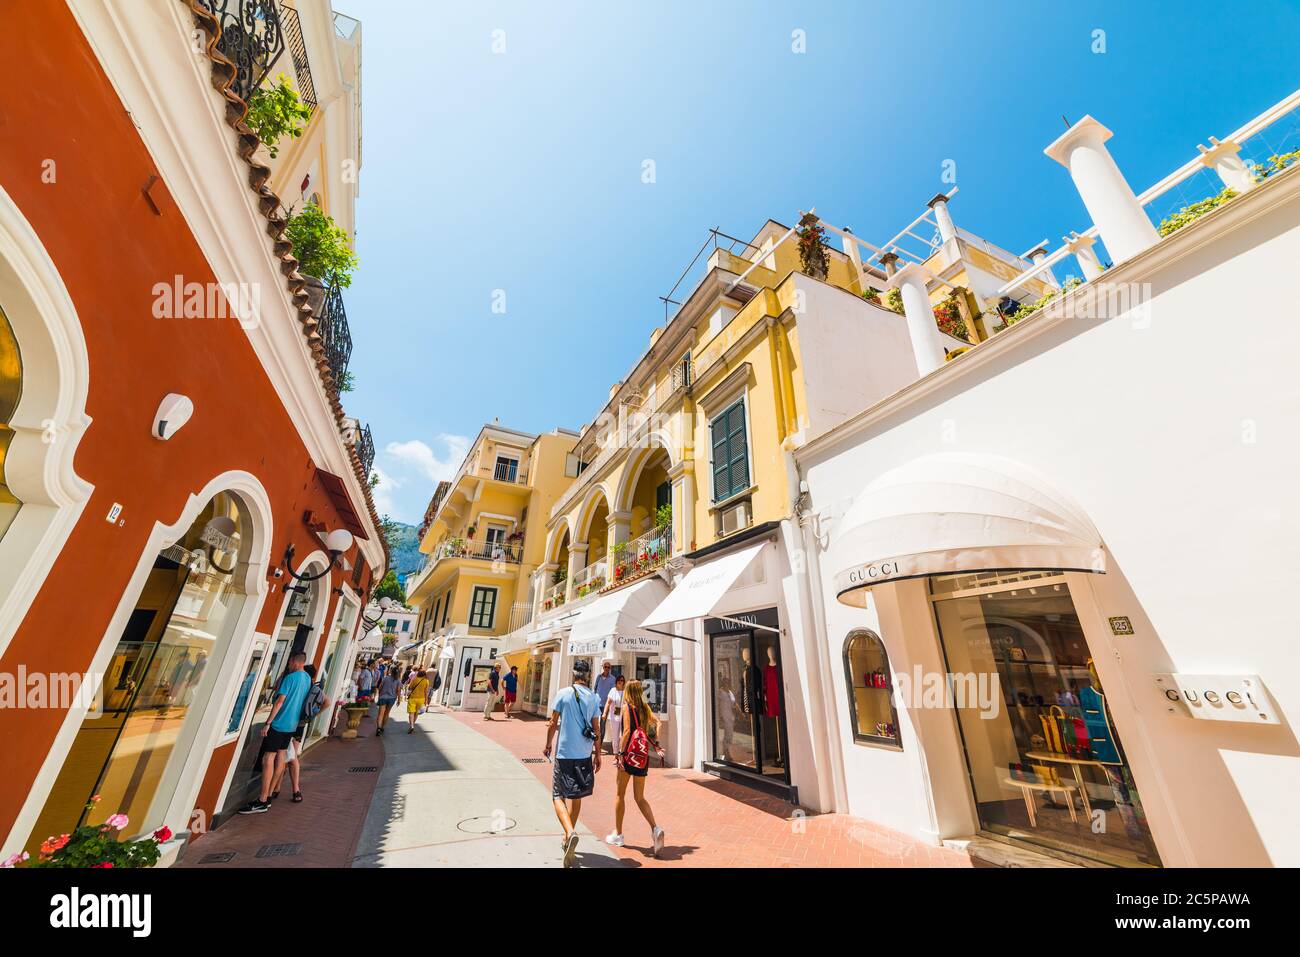 Page 3 - Capri Store High Stock Photography and Images - Alamy